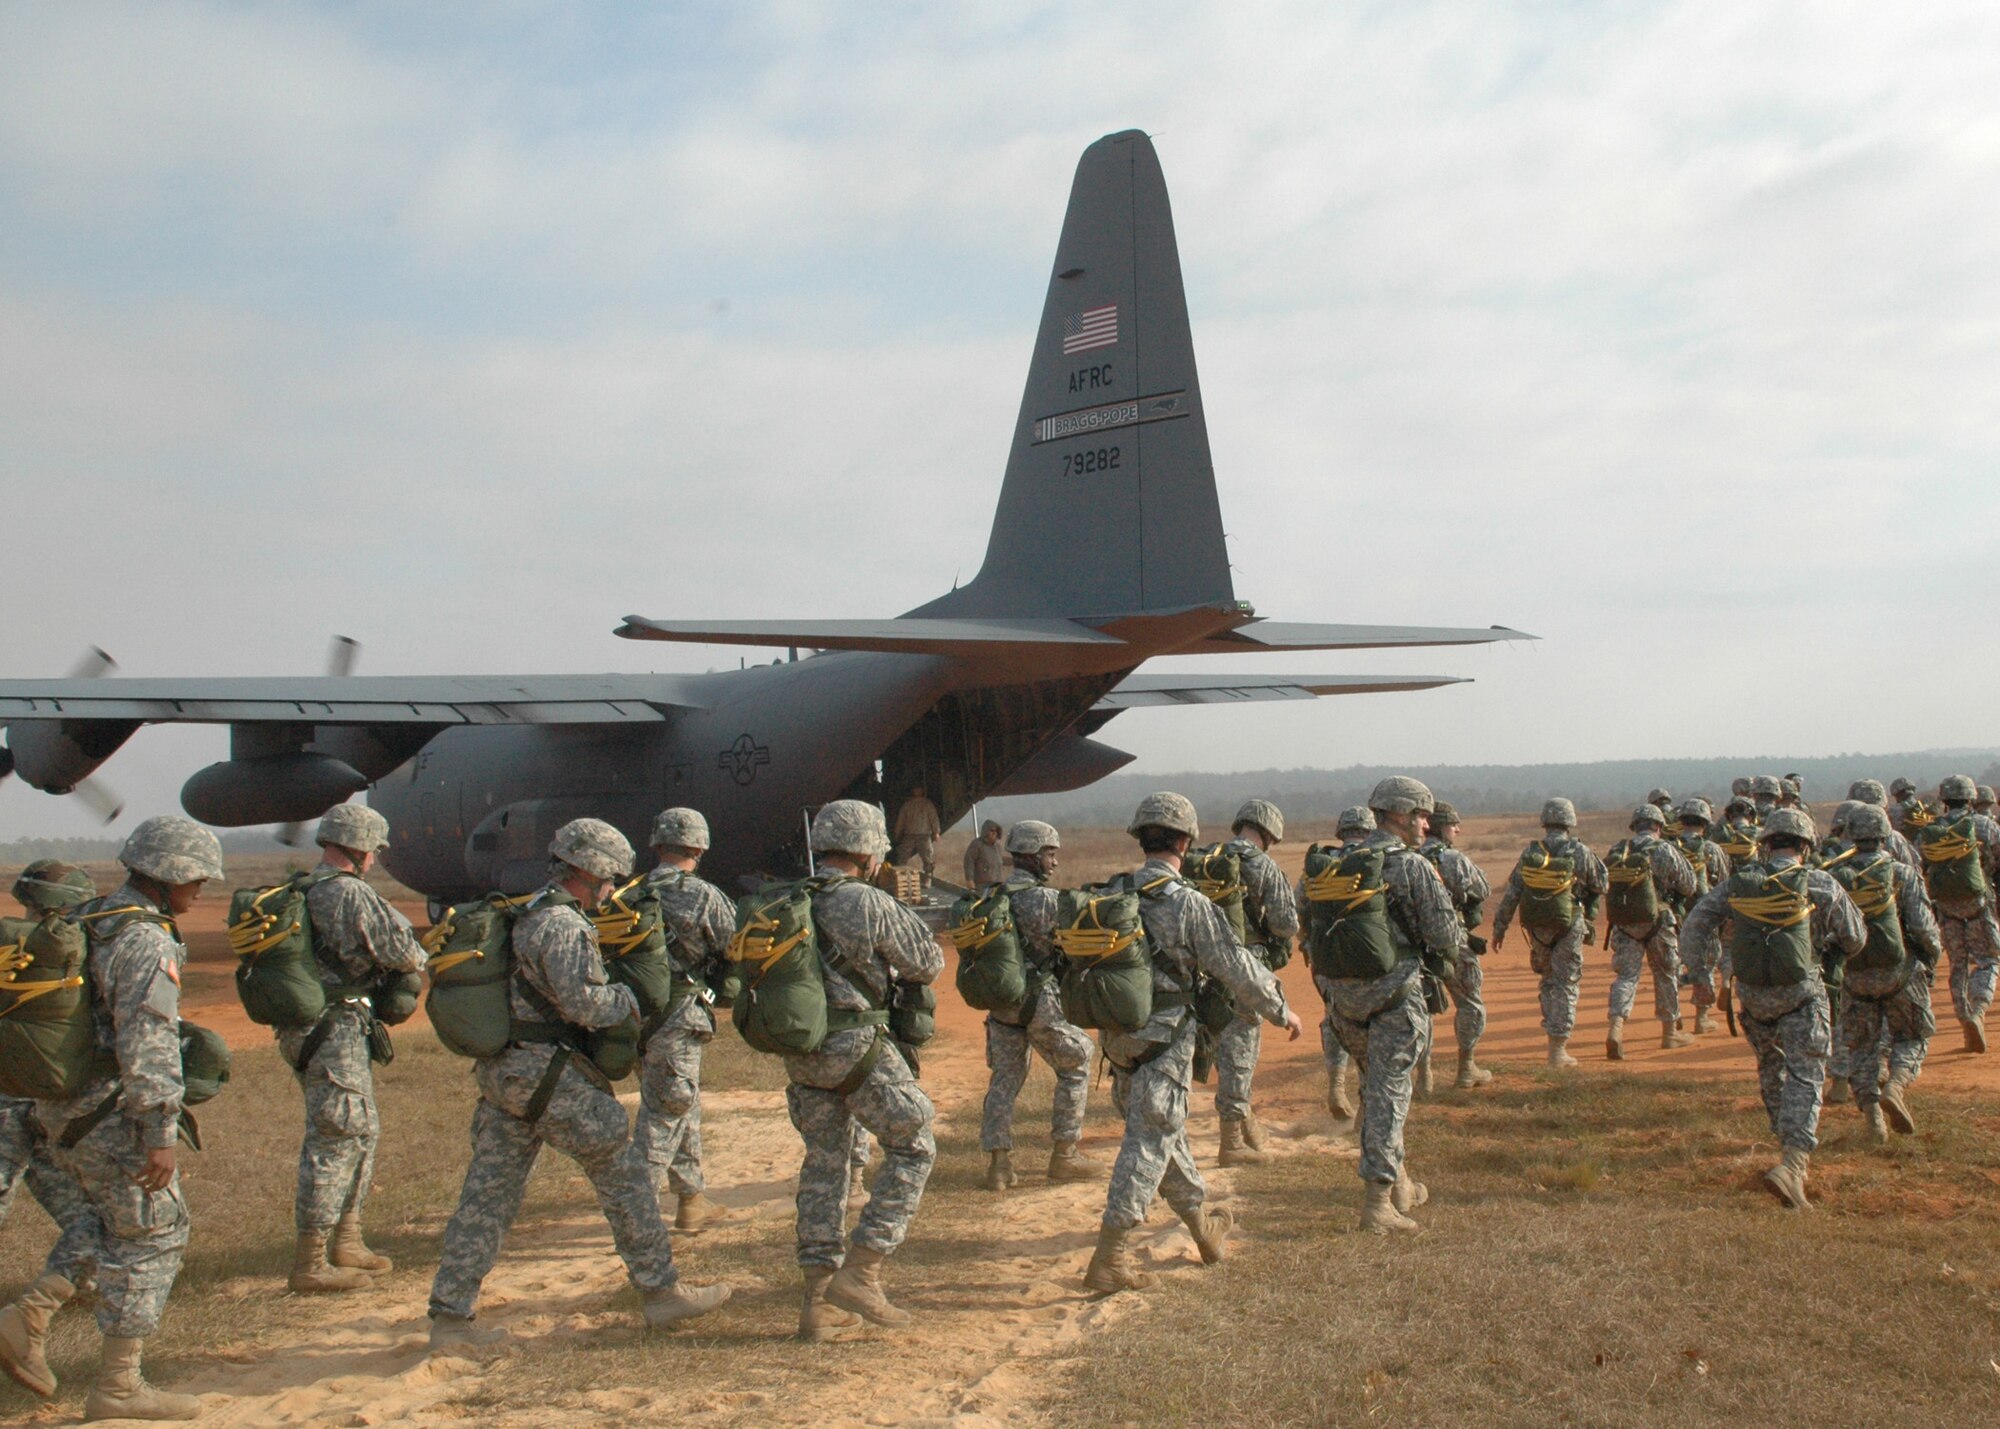 Fifty paratroopers walk to a C-130 with engines running during Operation Toy Drop. The 440th Airlift Wing at Pope Air Force Base, N.C., supported the combined joint exercise with C-130 airlift on Dec. 8, 2007. More than 1,050 paratroopers jumped during the exercise held at the Sicily Drop Zone at Fort Bragg, N.C. (U.S. Air Force photo/Lt. Col. Ann Peru Knabe)